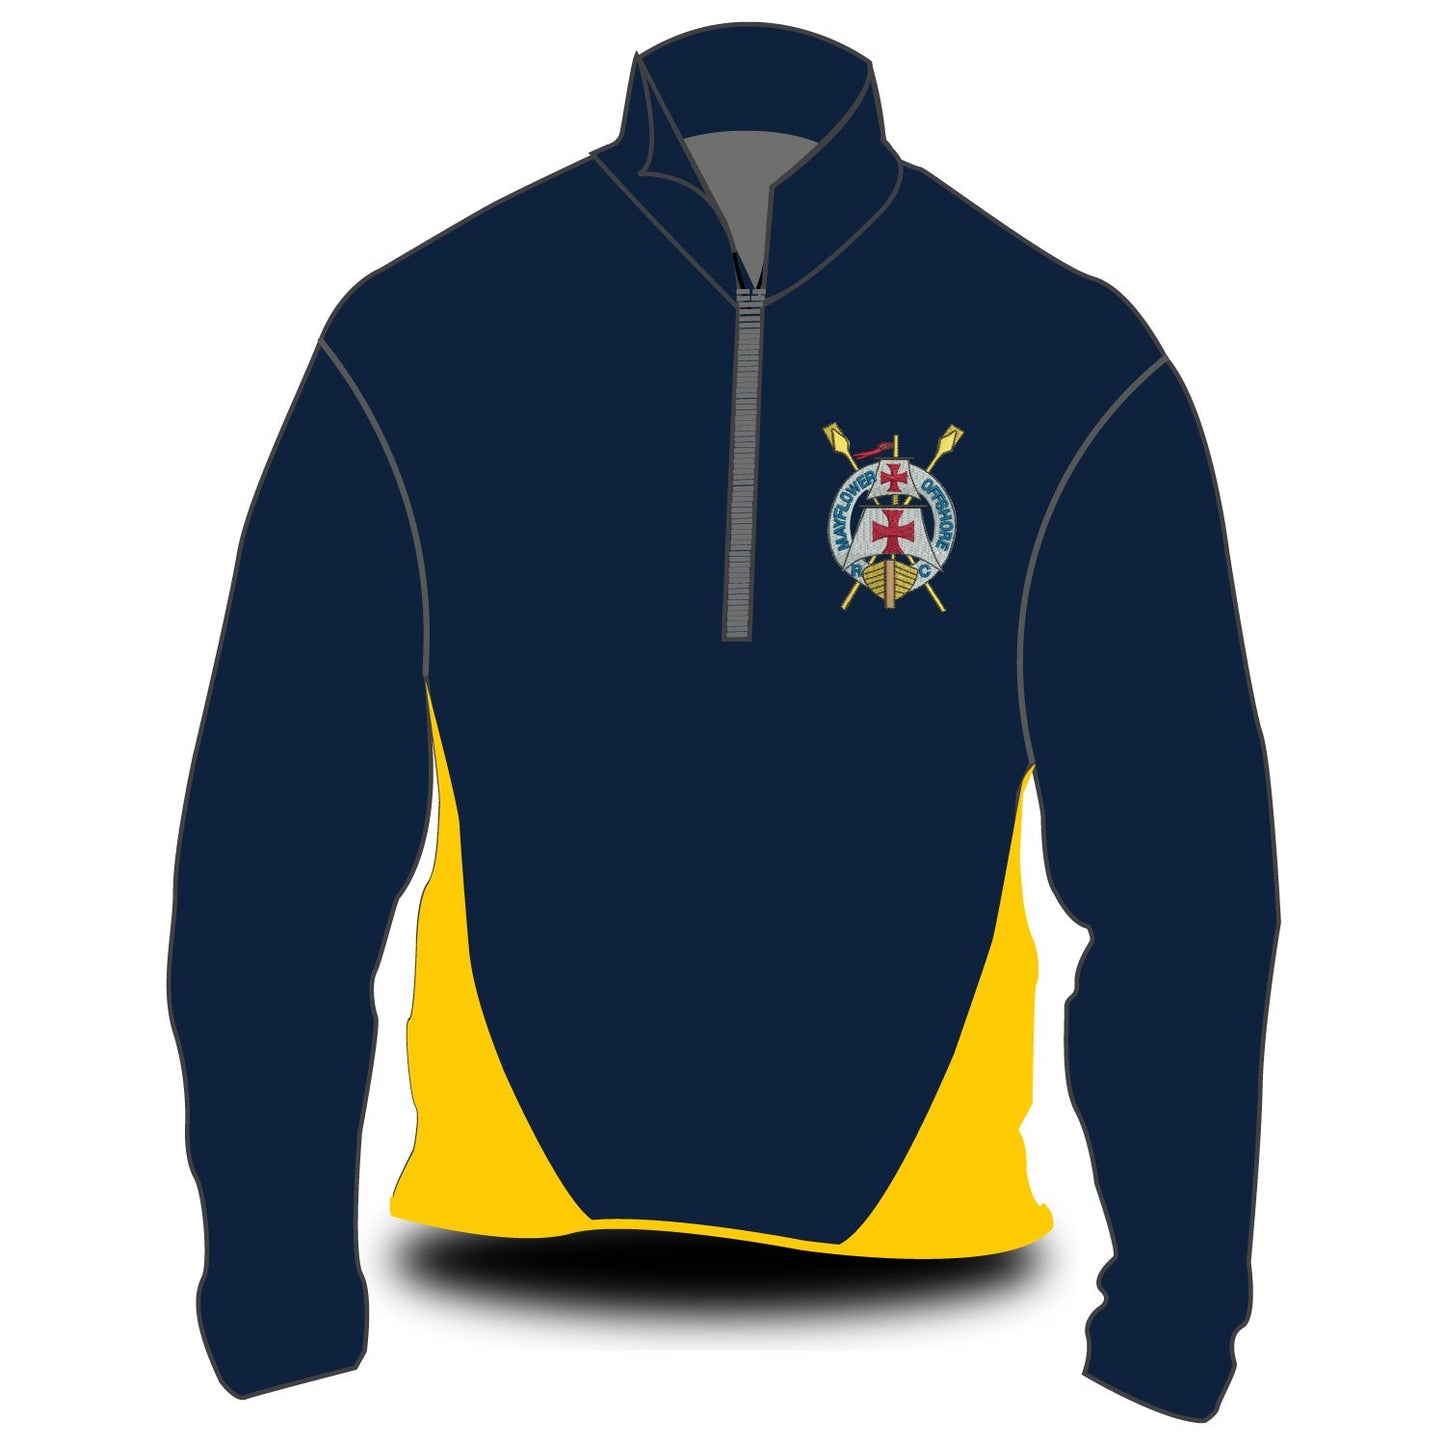 Mayflower Offshore Rowing Club 24-7 Jacket